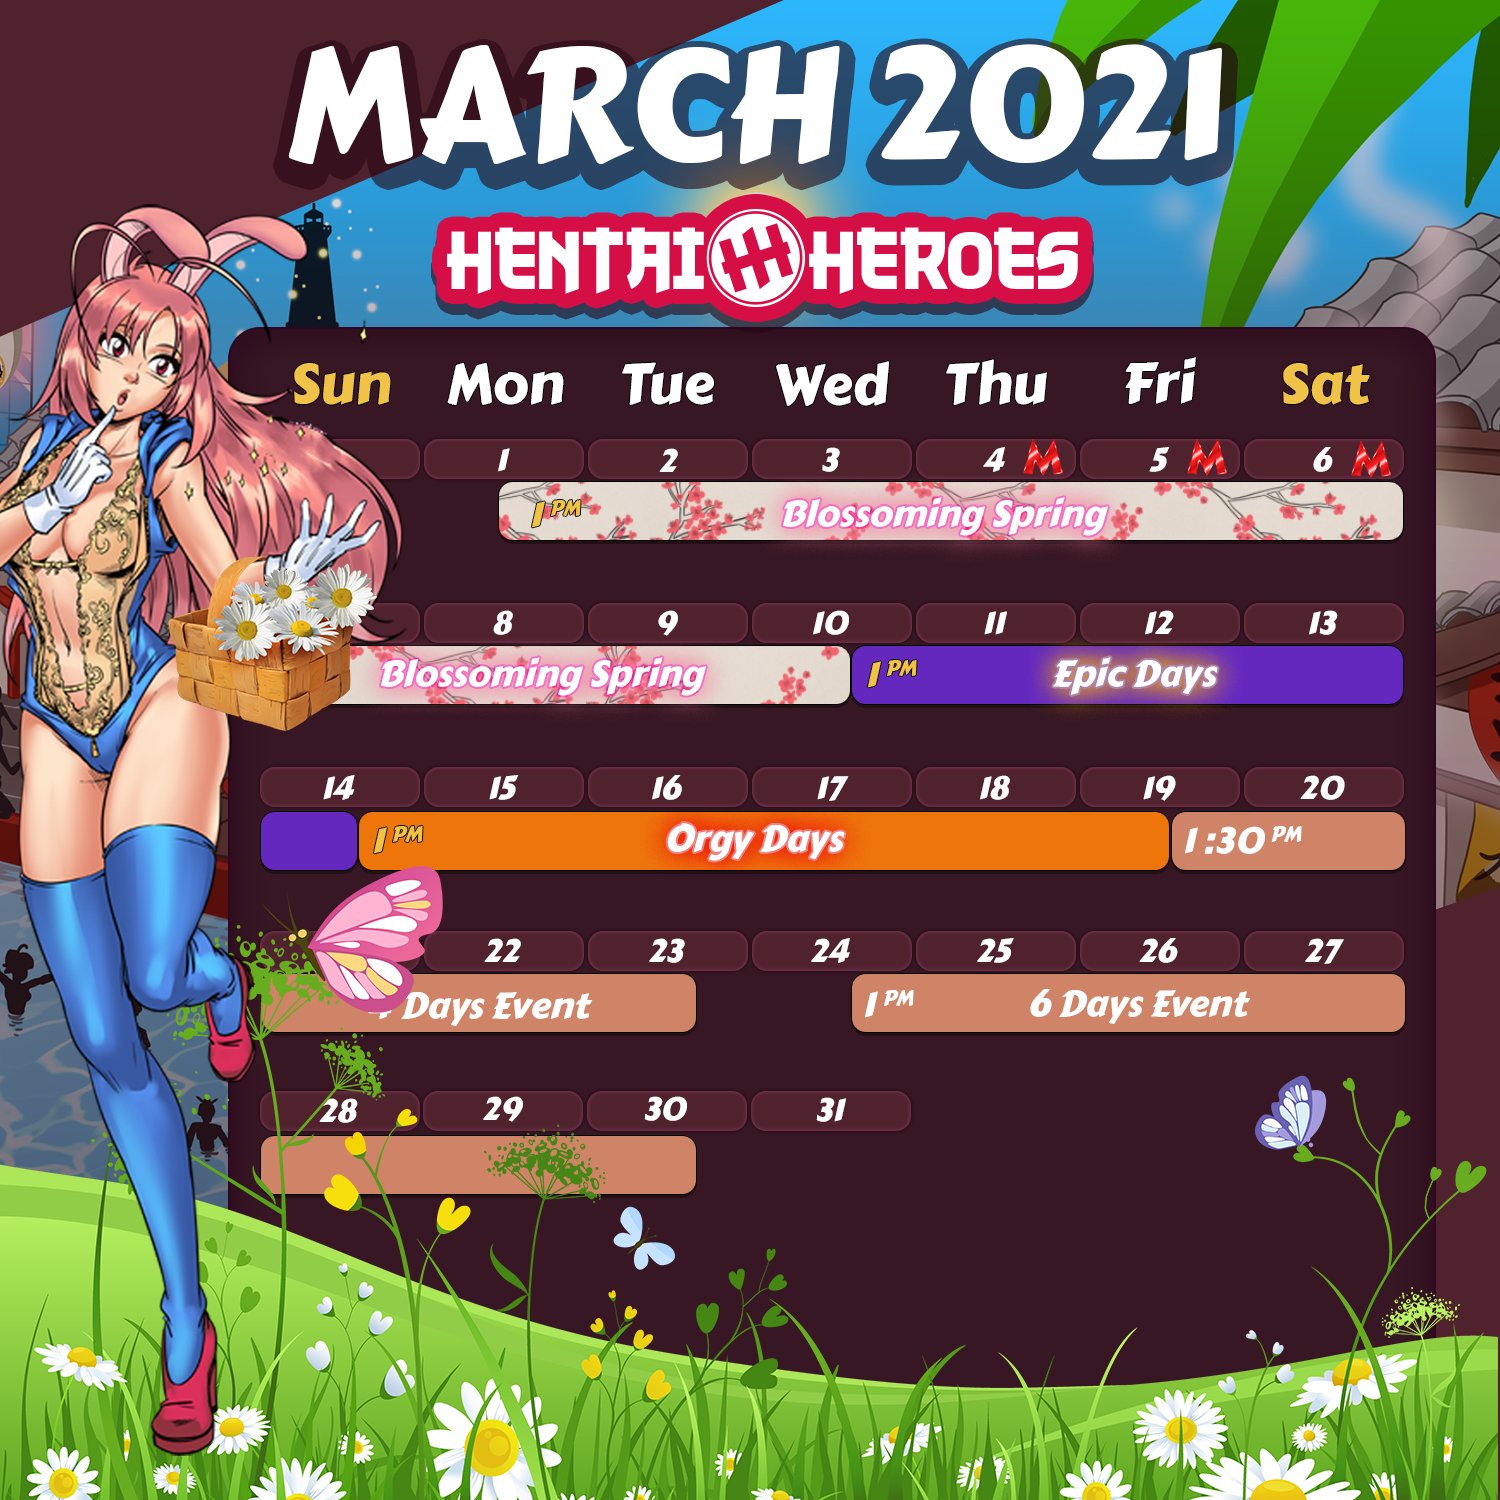 harem heroes event girl need to end world